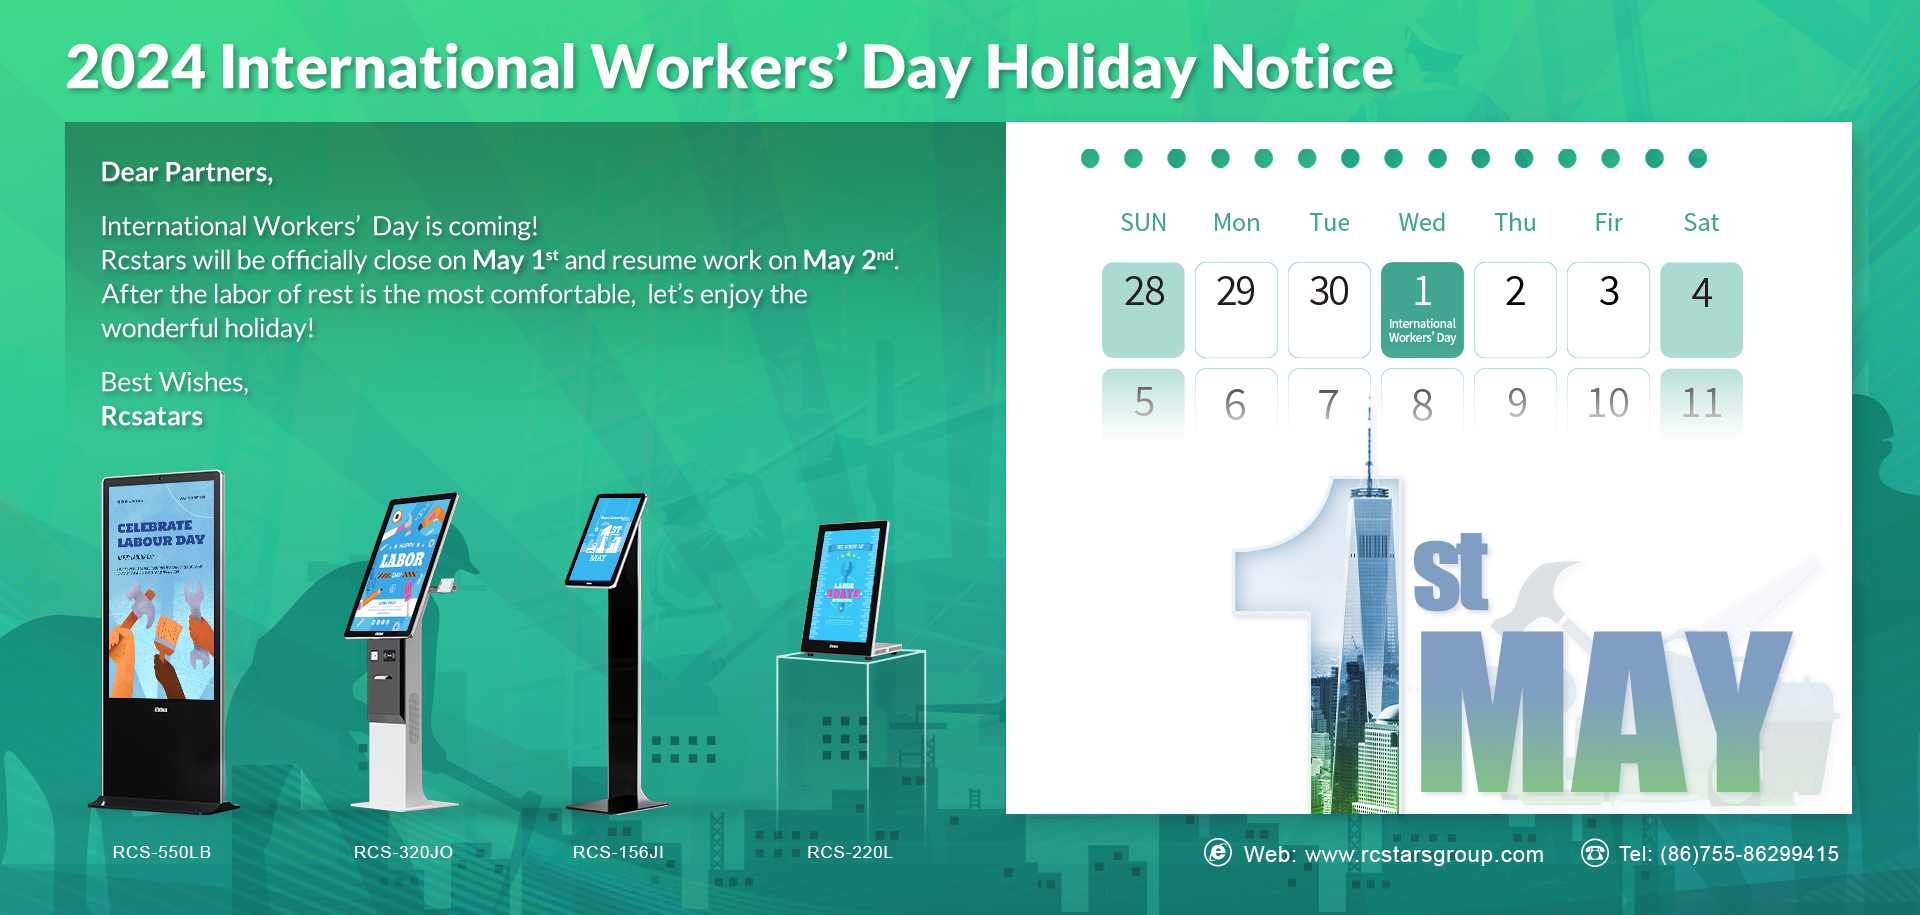 International Workers' Day 2024 Holiday Notice